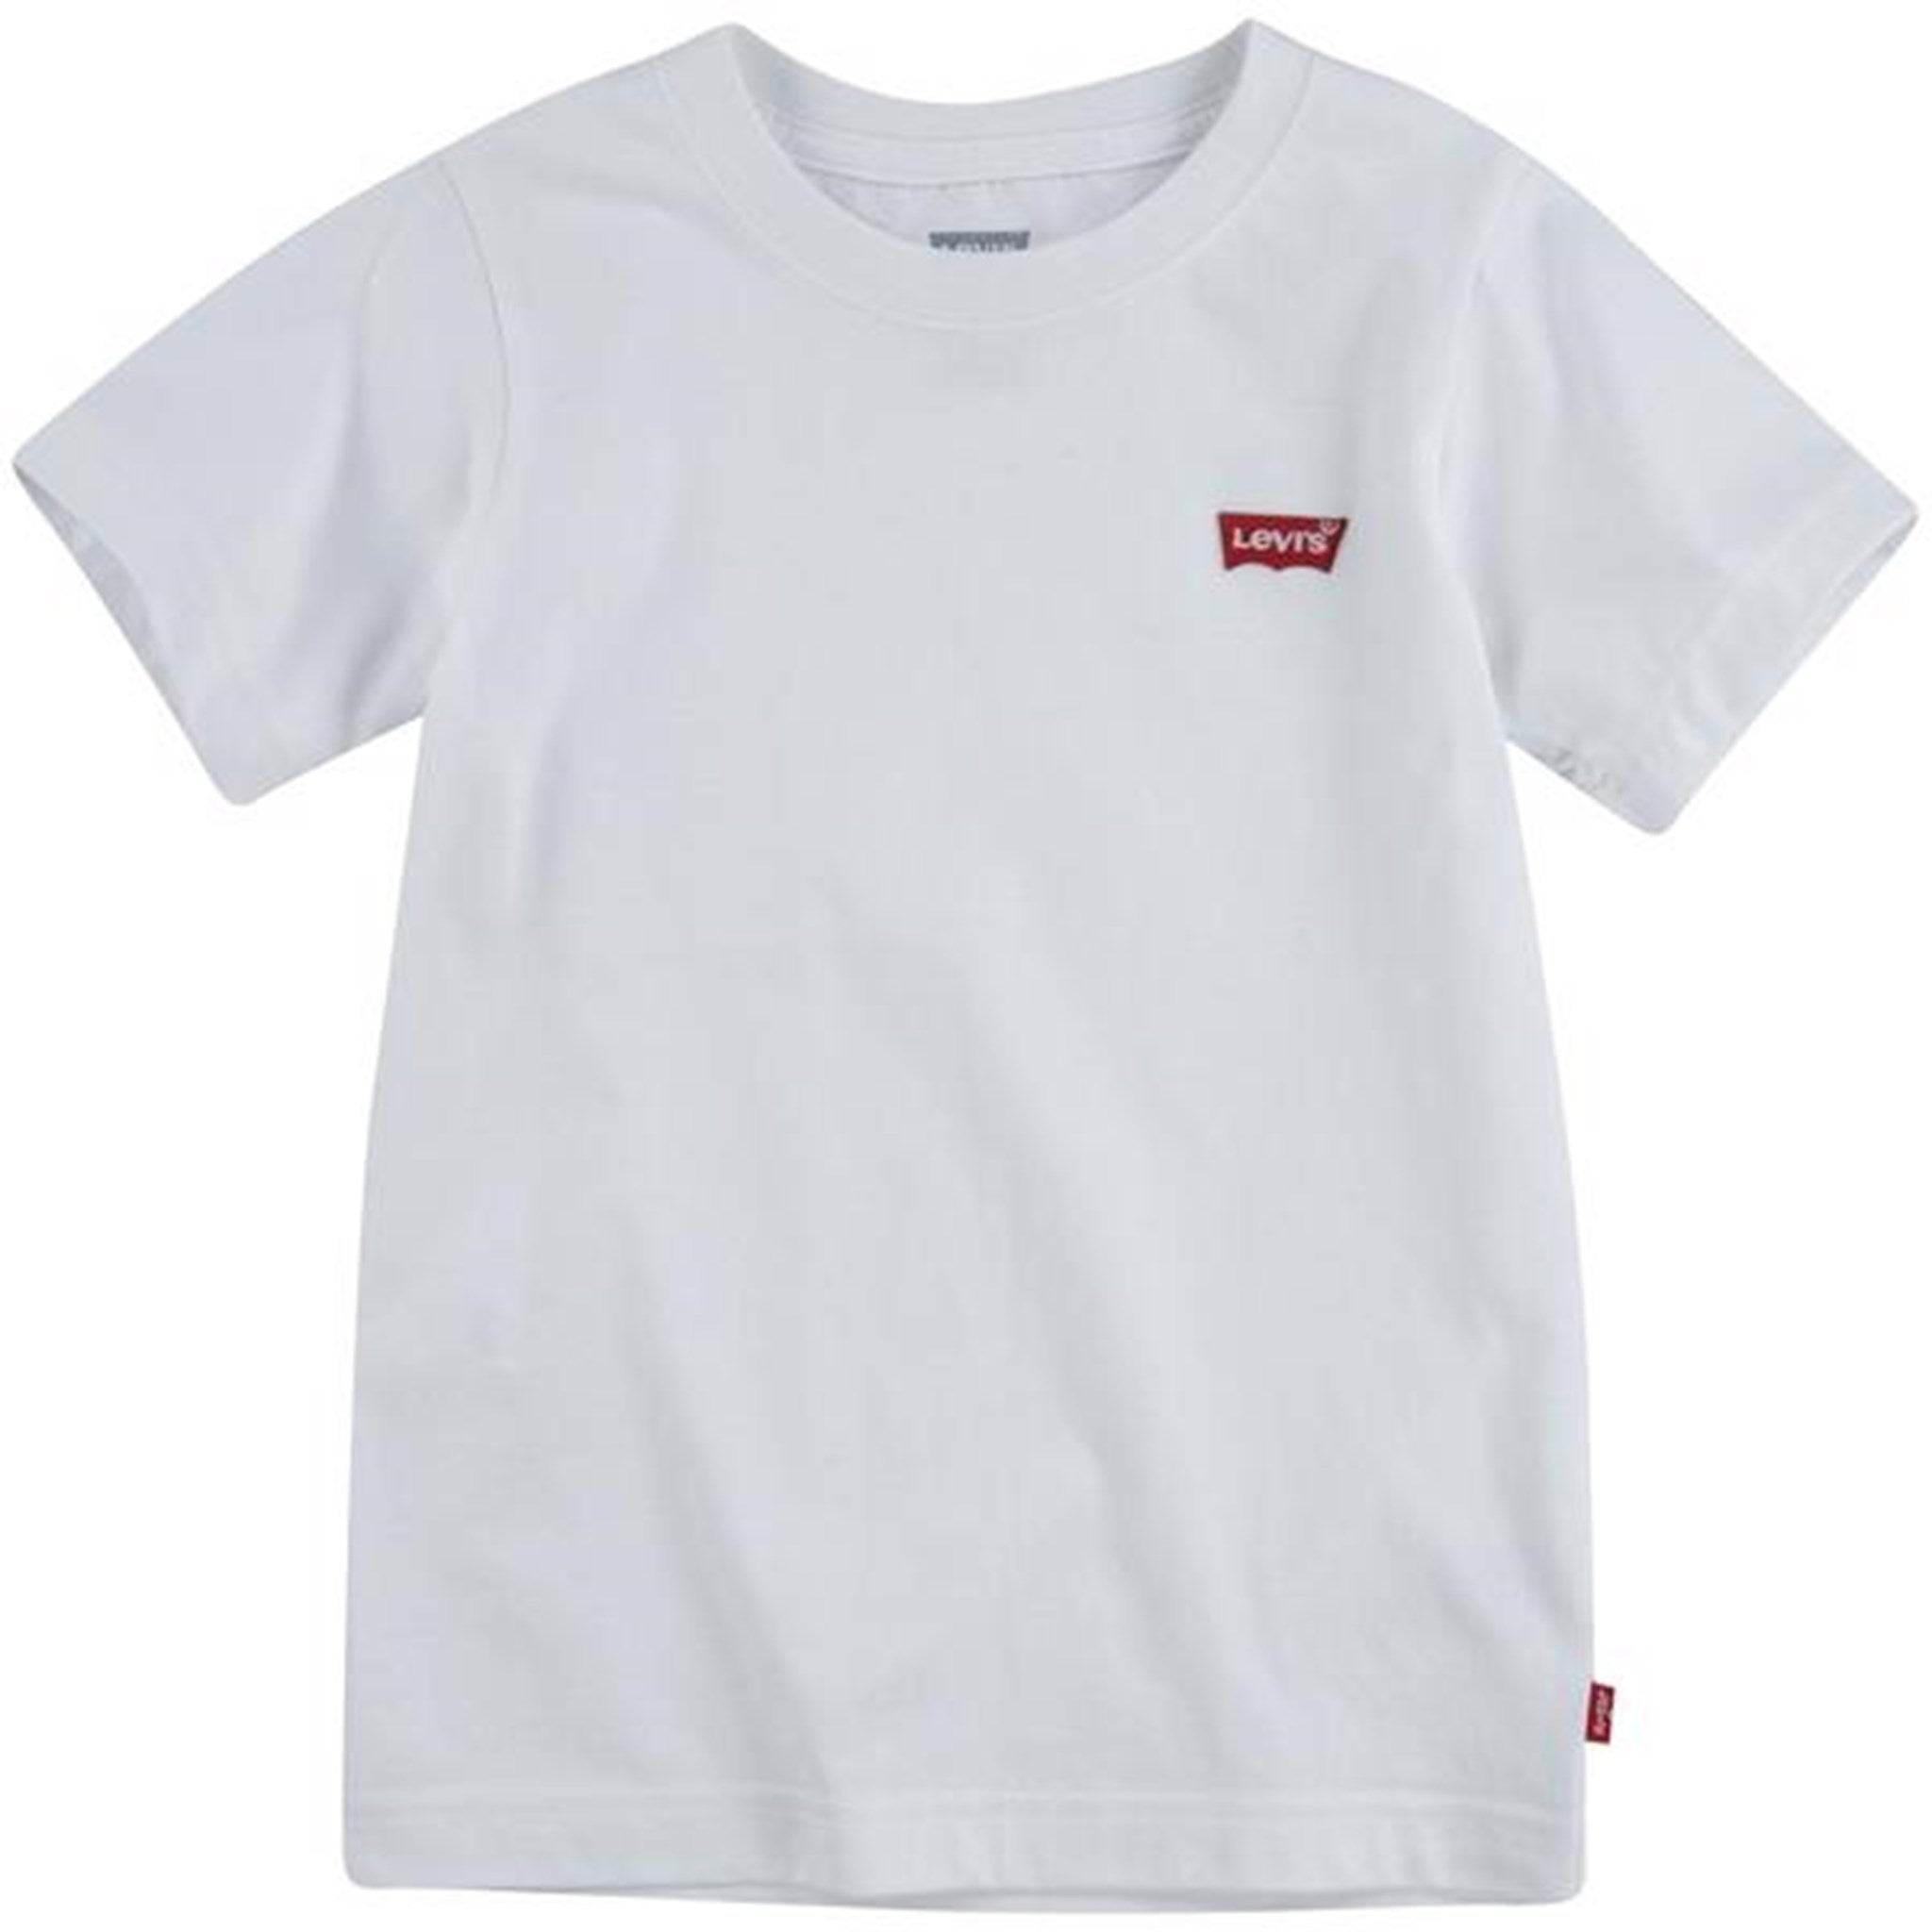 Levis Tee SS Batwing Chest Hit White